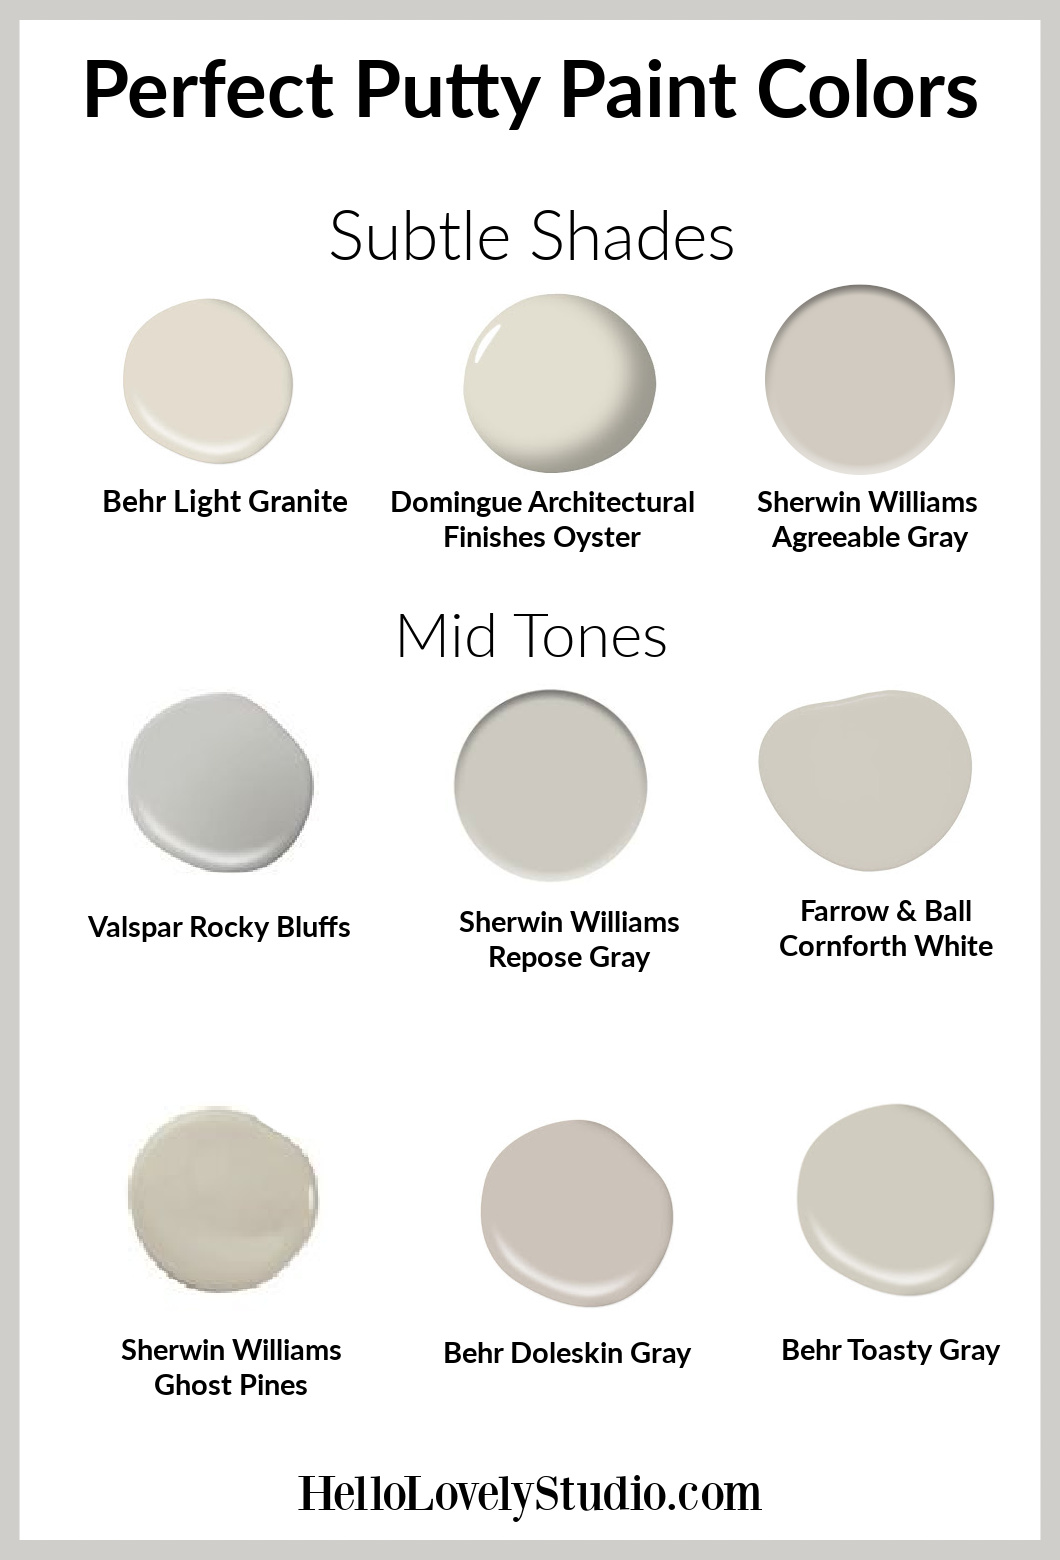 Perfect Putty Paint Colors for Kitchens & Beyond - Hello Lovely